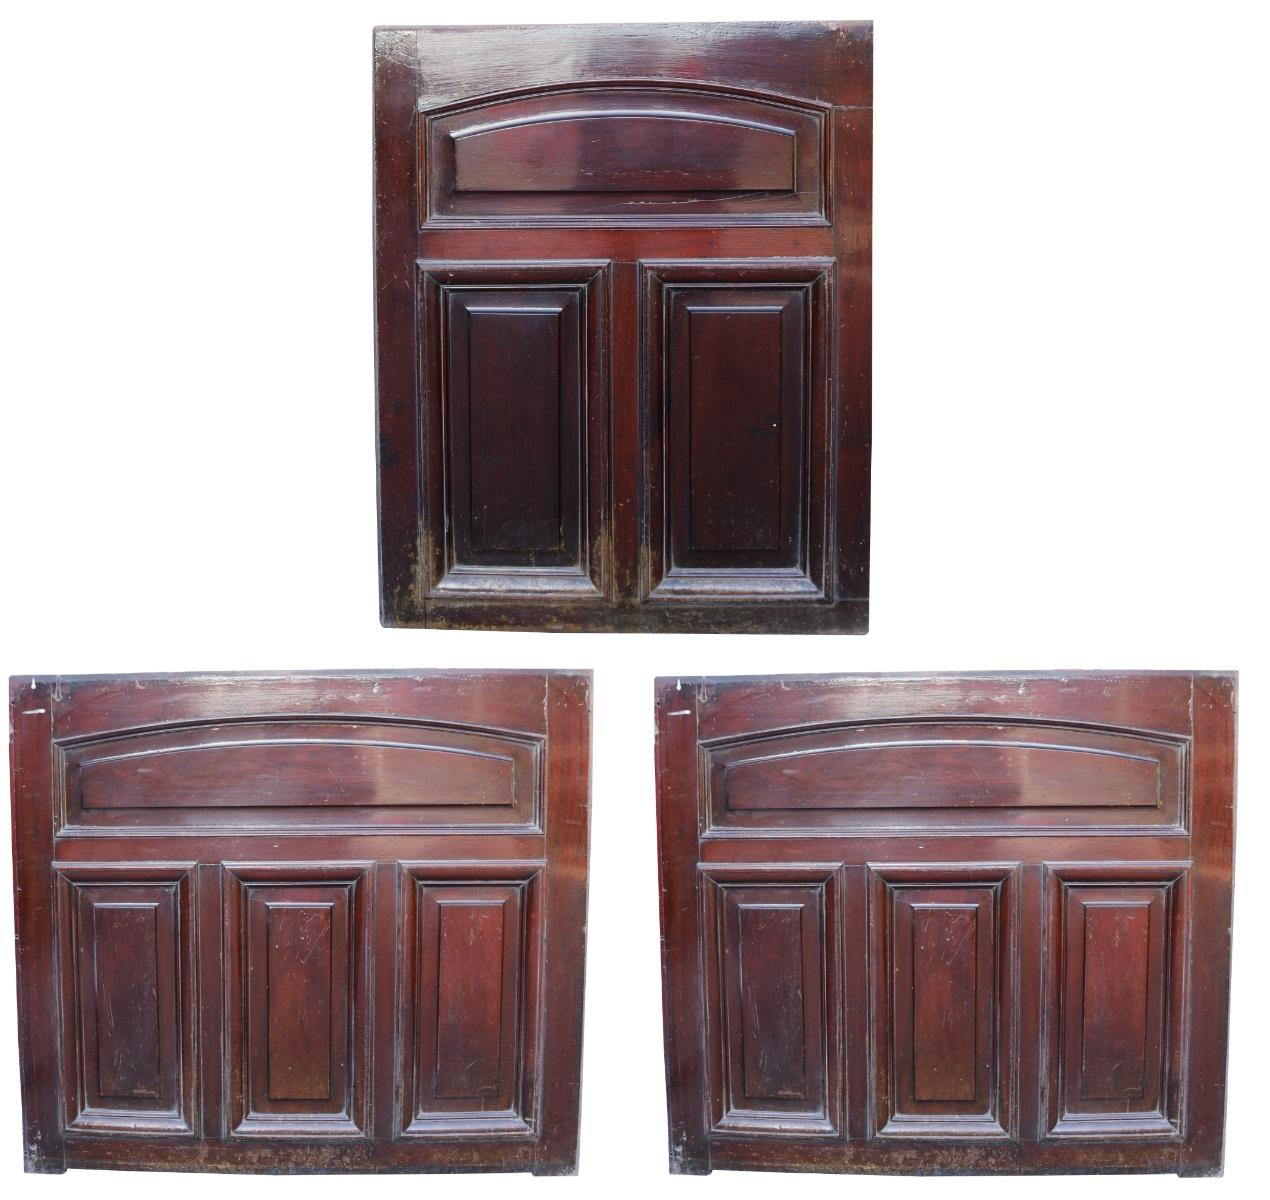 Three sections of reclaimed Victorian mahogany bar counter panelling.

Additional Dimensions:

2 panels- 96 x 108 x 4 cm

1 panel- 94 x 76 x 4 cm